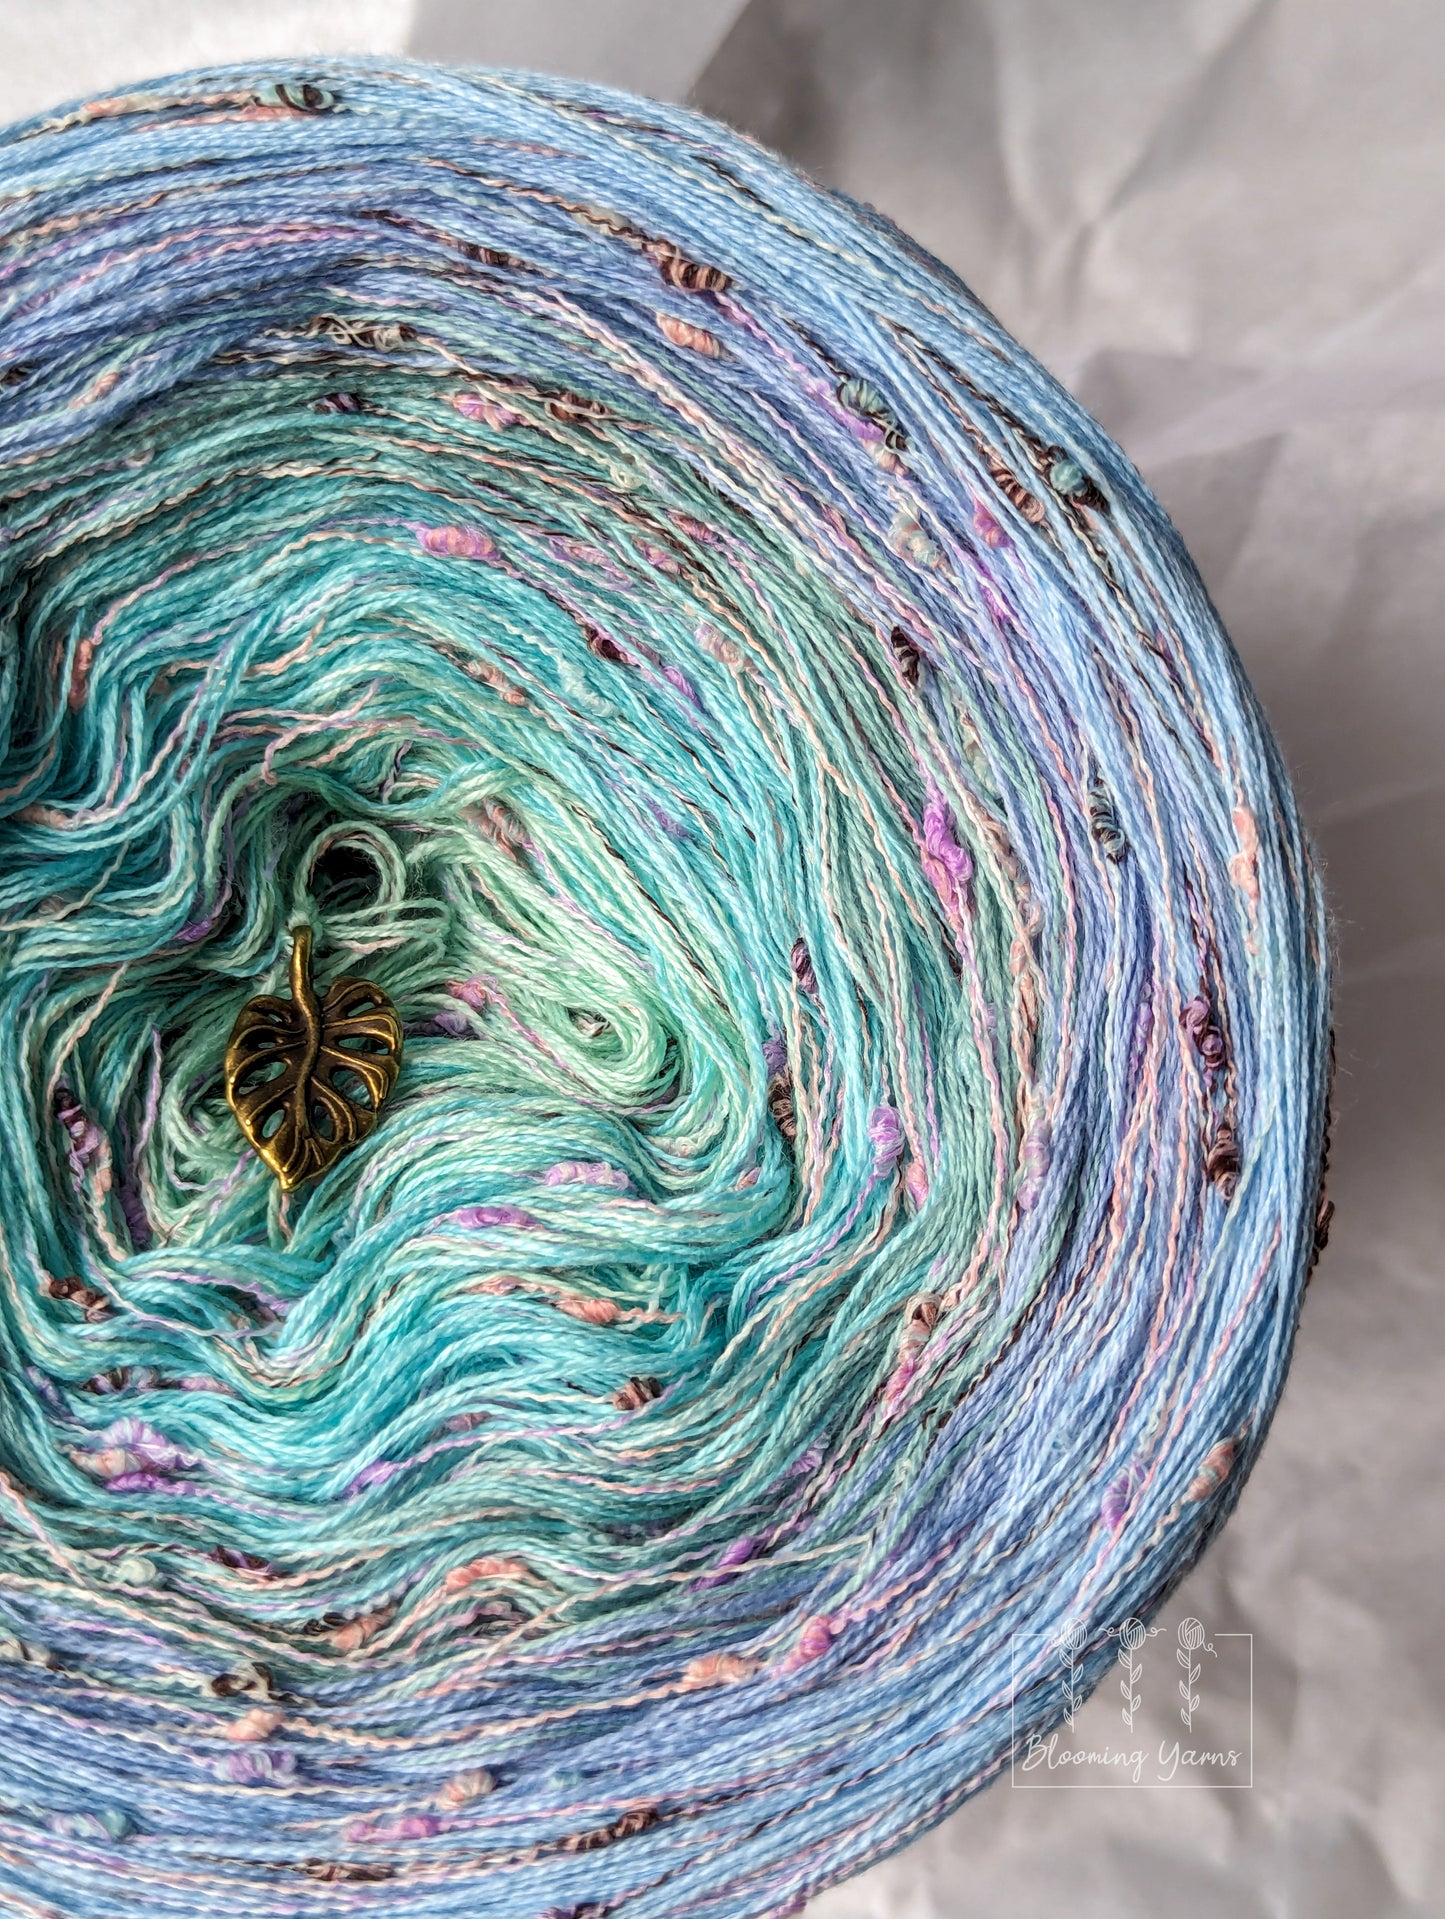 C316 cotton/acrylic ombre yarn cake, 270g, about 950m, 3ply+add., normal style